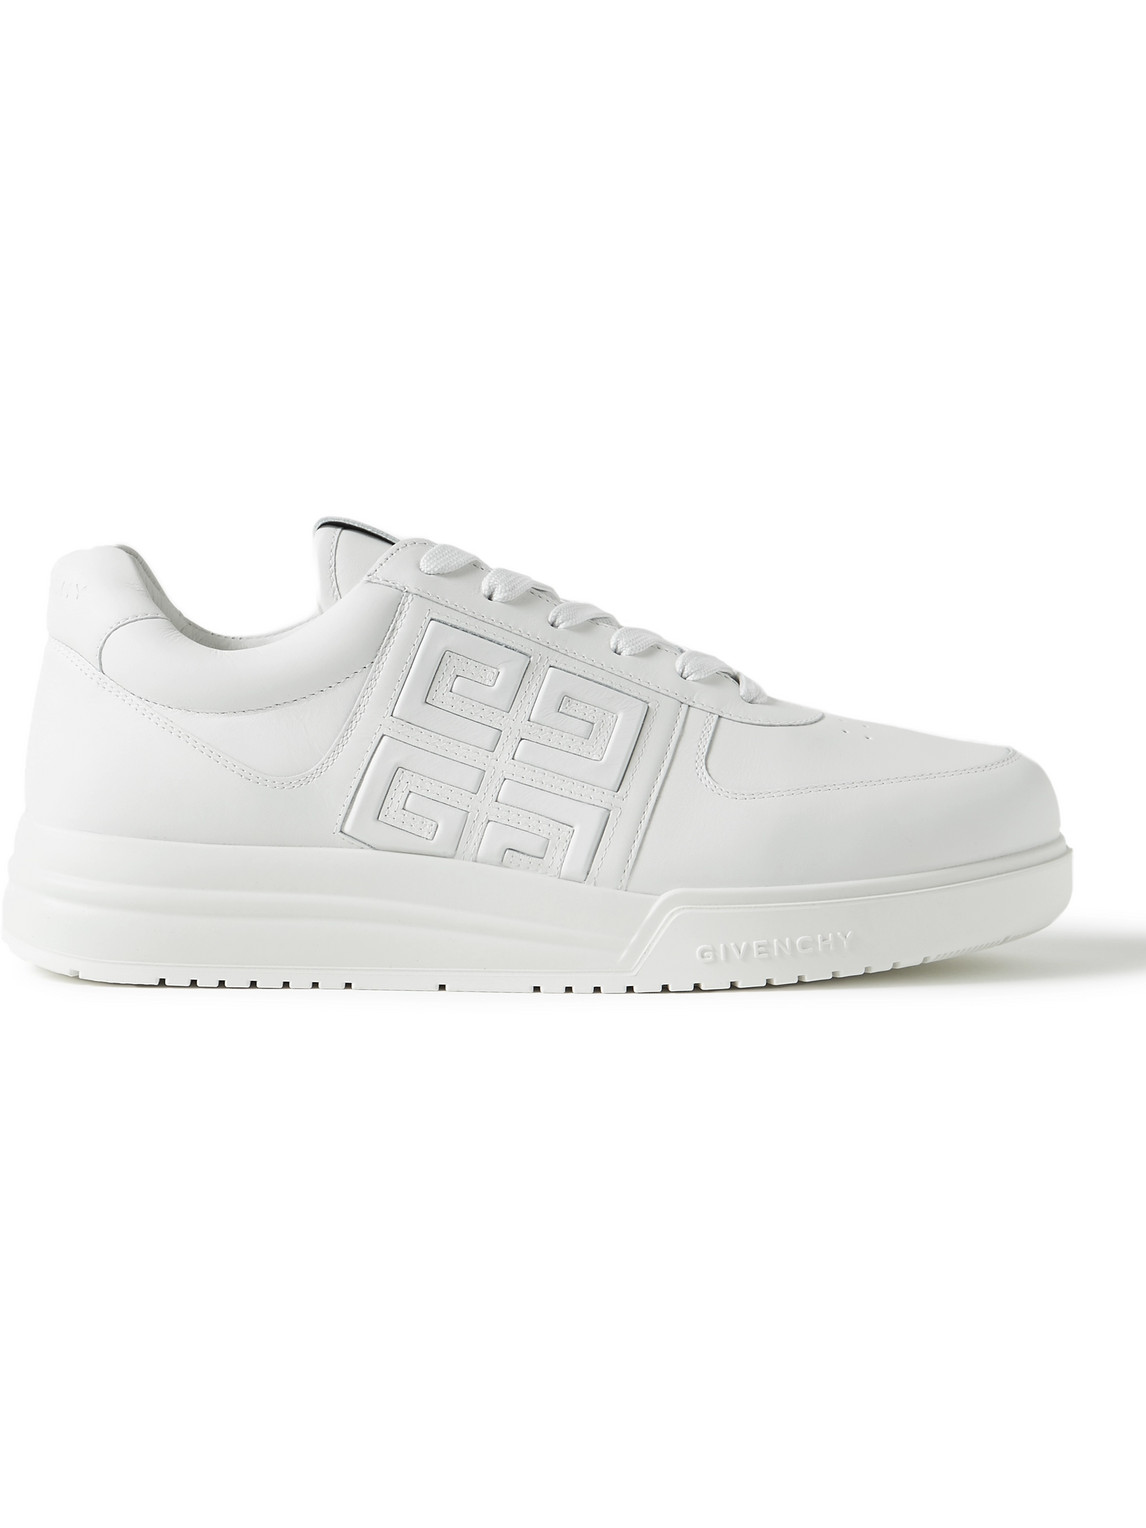 Givenchy G4 Logo-Embossed Leather Sneakers